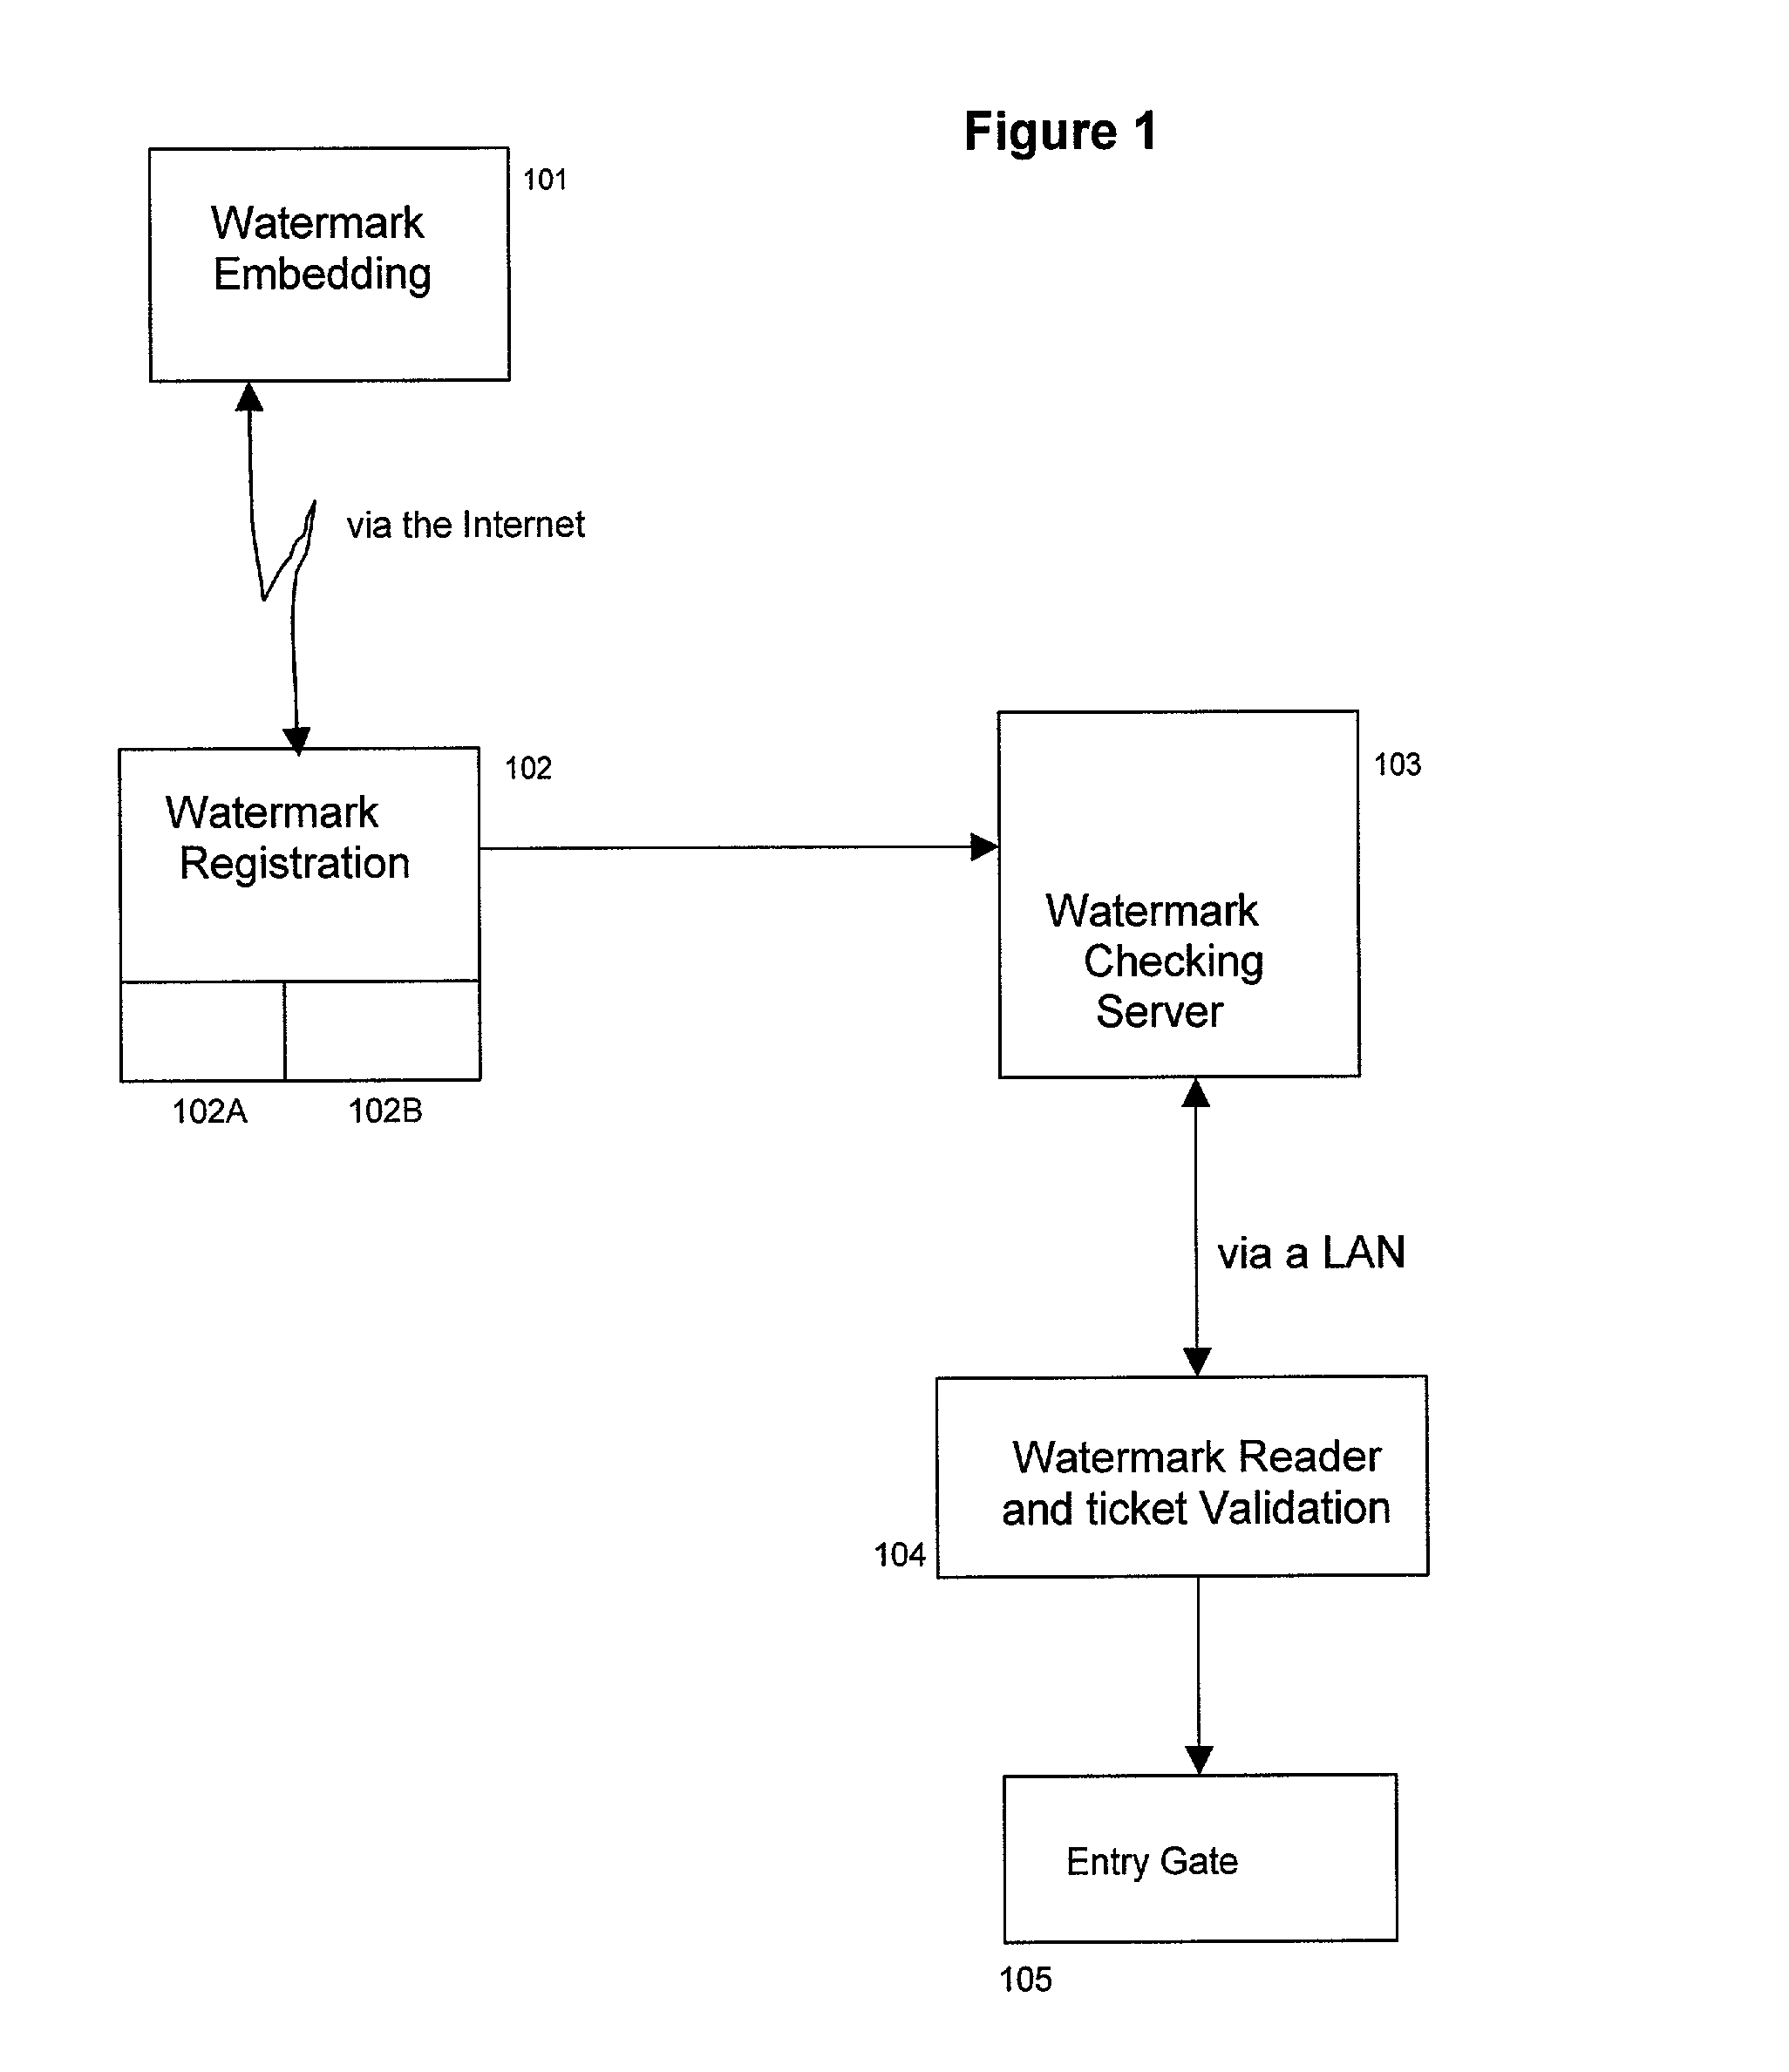 Distributed system for responding to watermarked documents